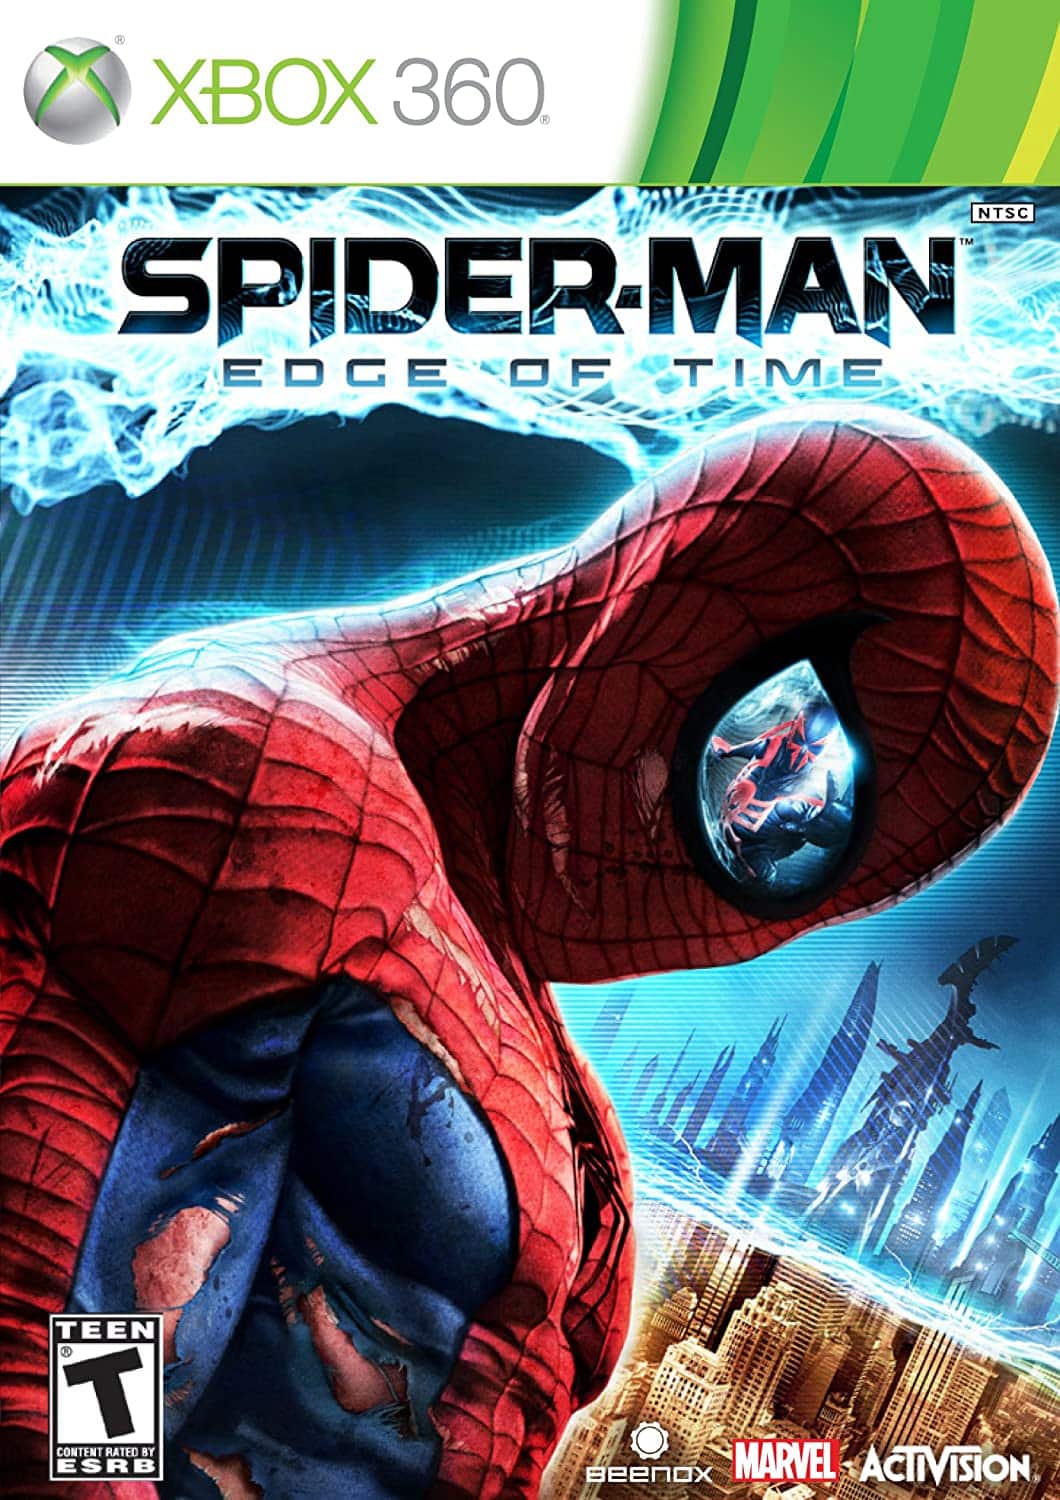 Spider-Man: Edge of Time player count stats